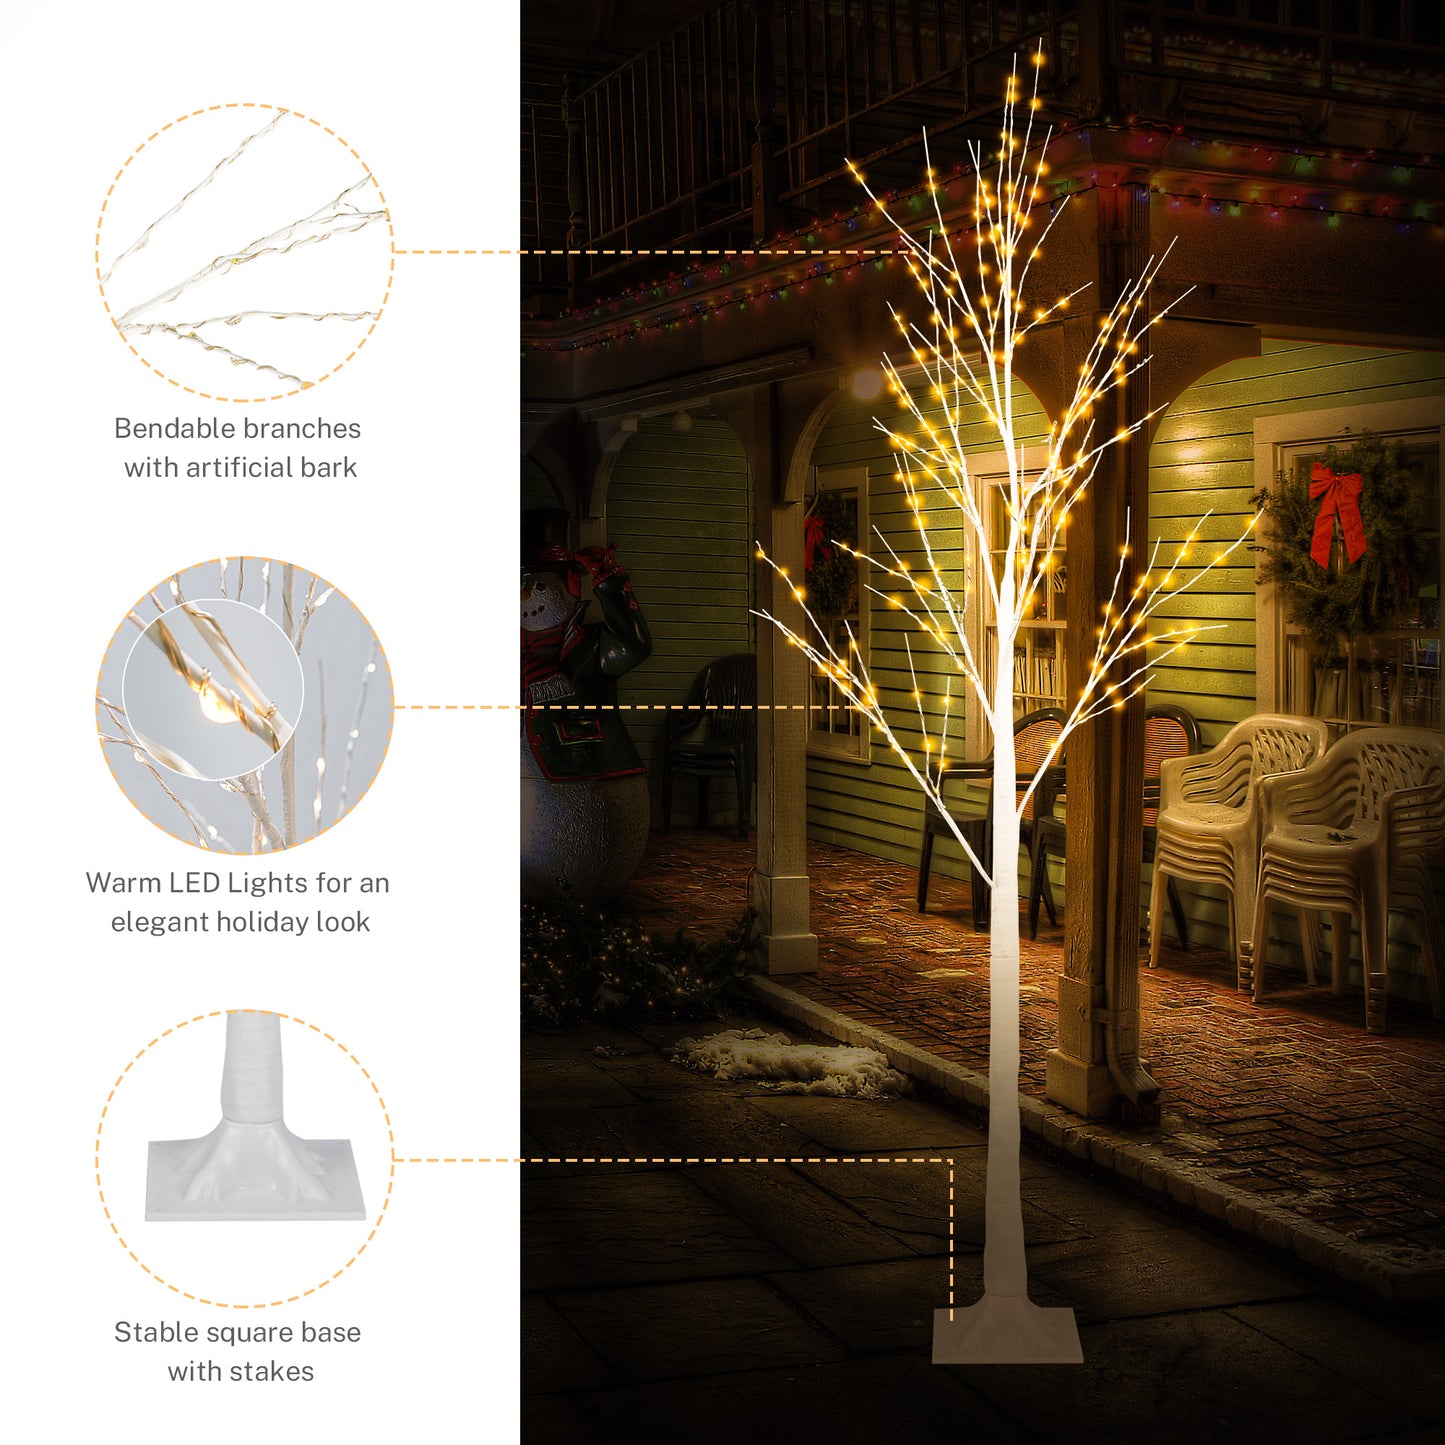 4ft/5ft/6ft White Birch Trees Set of 3, Christmas Trees with LED Lights, Lighted Birch Trees for Home Indoor Outdoor Festival Party Decoration, Christmas Decoration Trees, Warm White, Y034